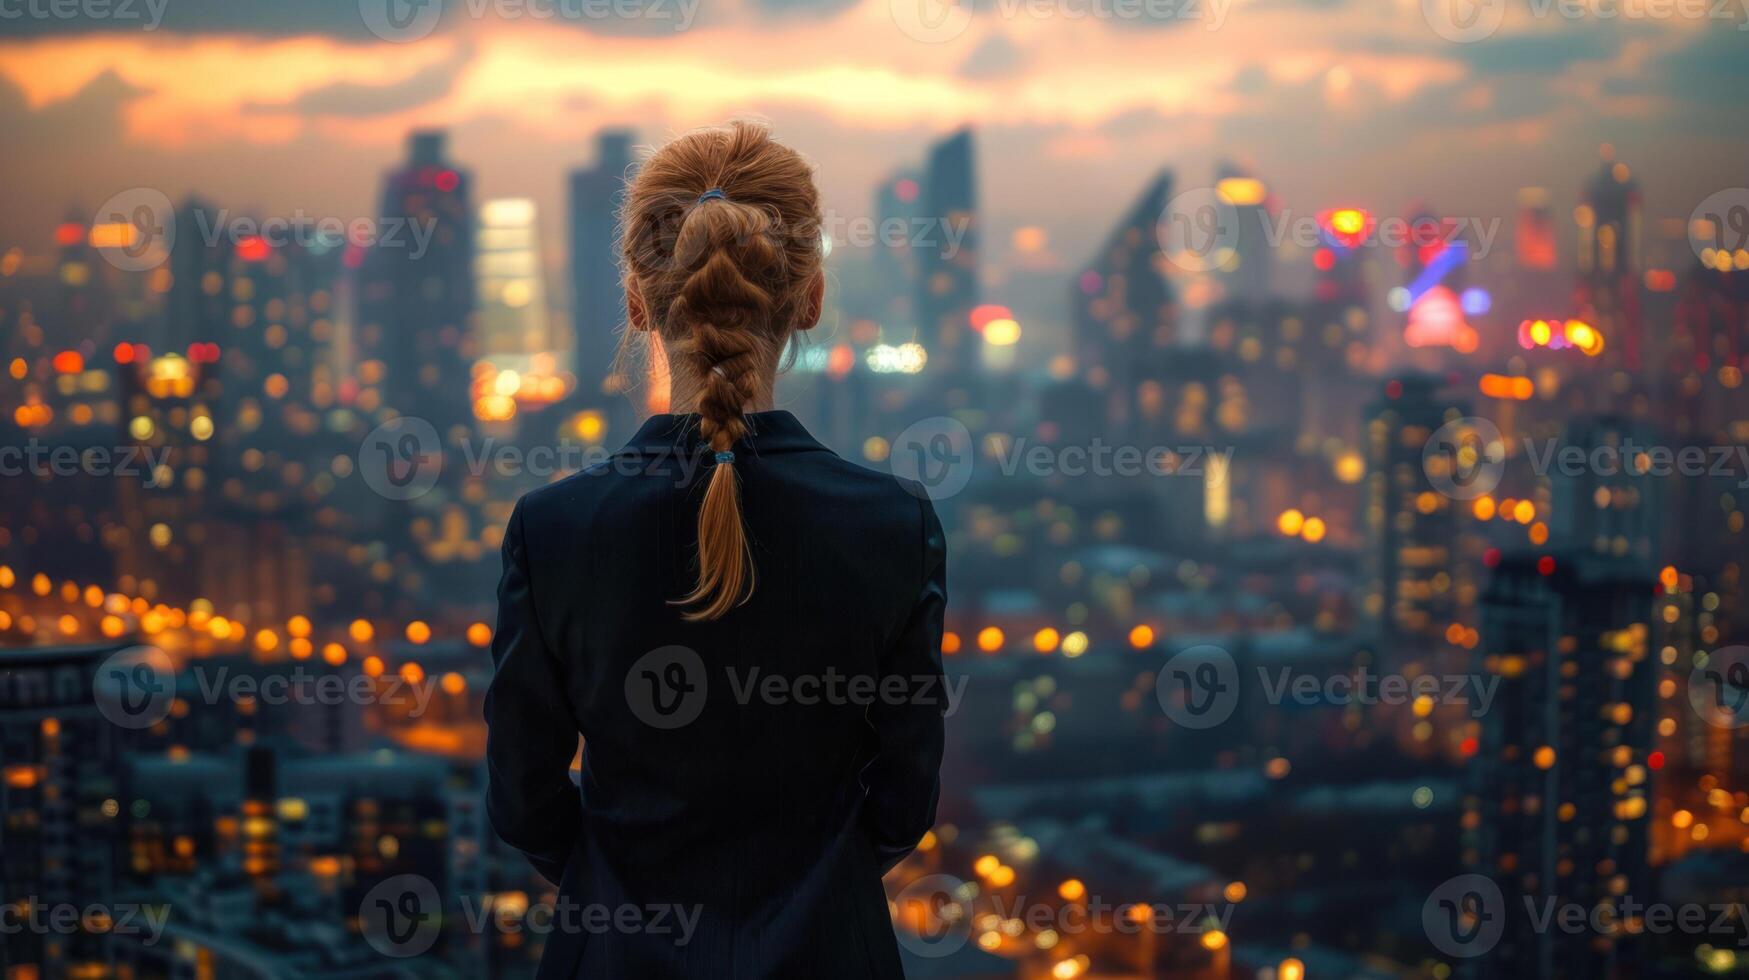 A woman confidently stands on the edge of a skyscraper, overlooking the city below photo